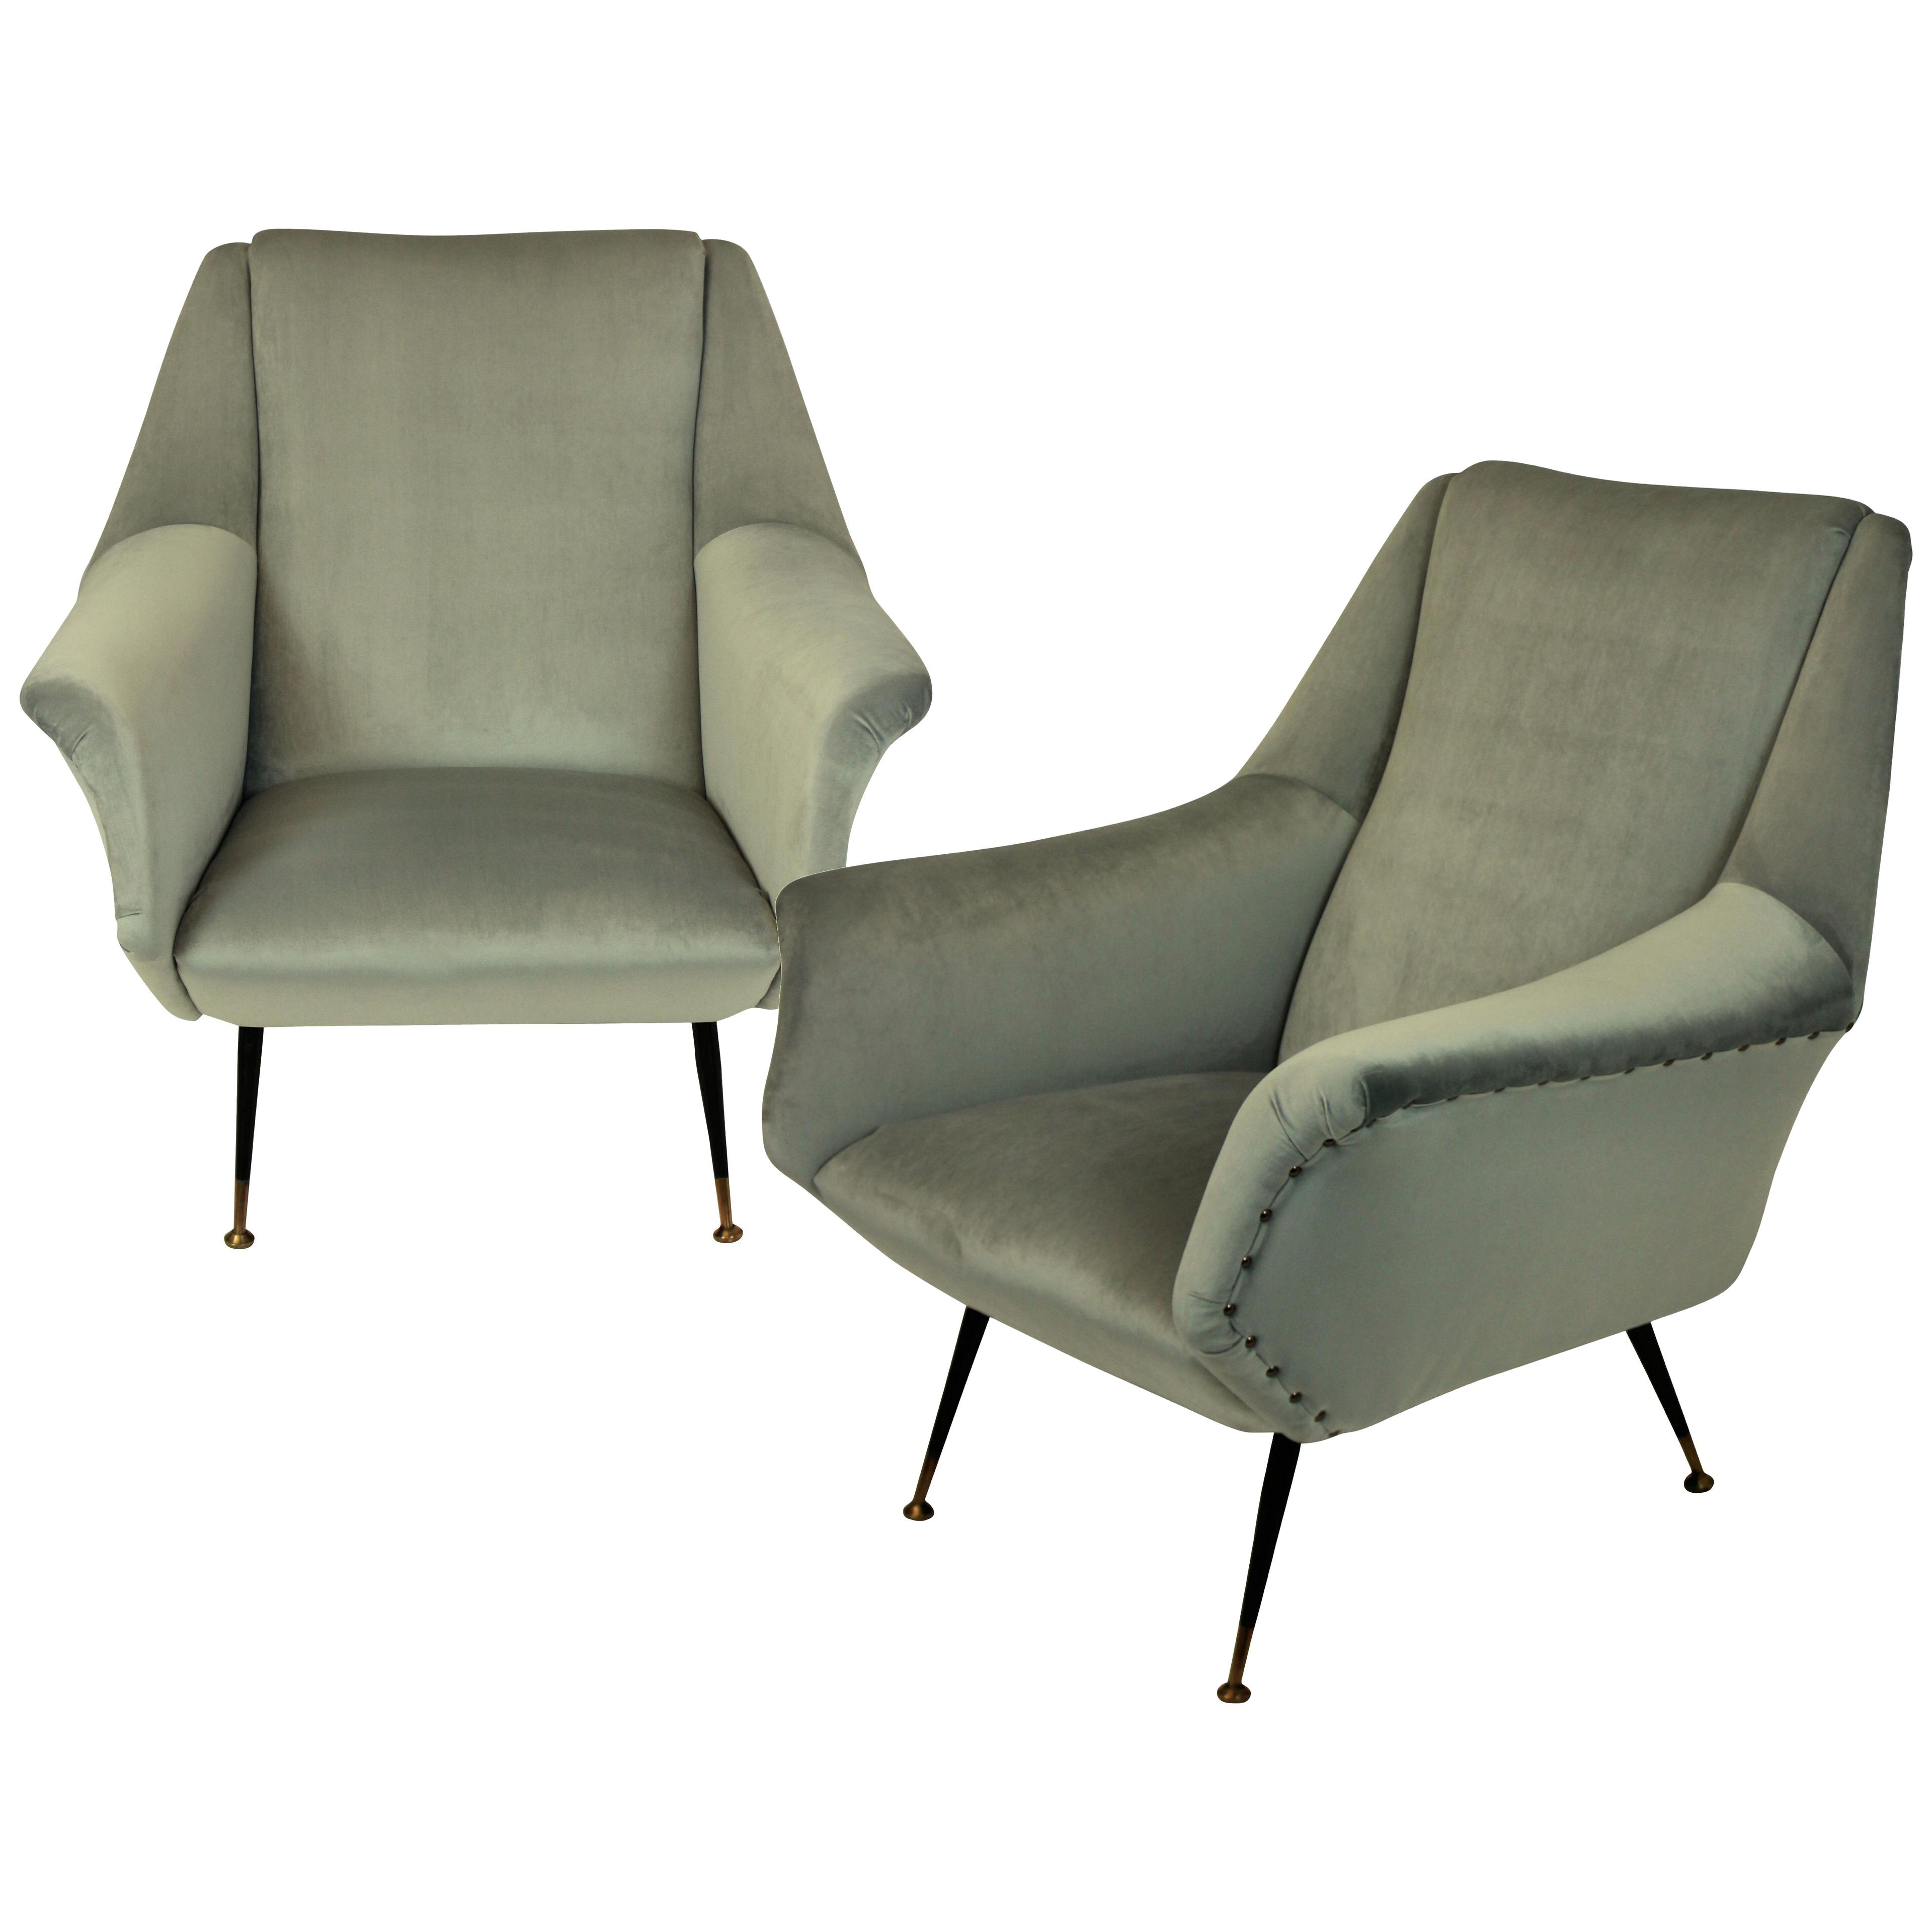 A PAIR OF ARMCHAIRS BY GIO PONTI